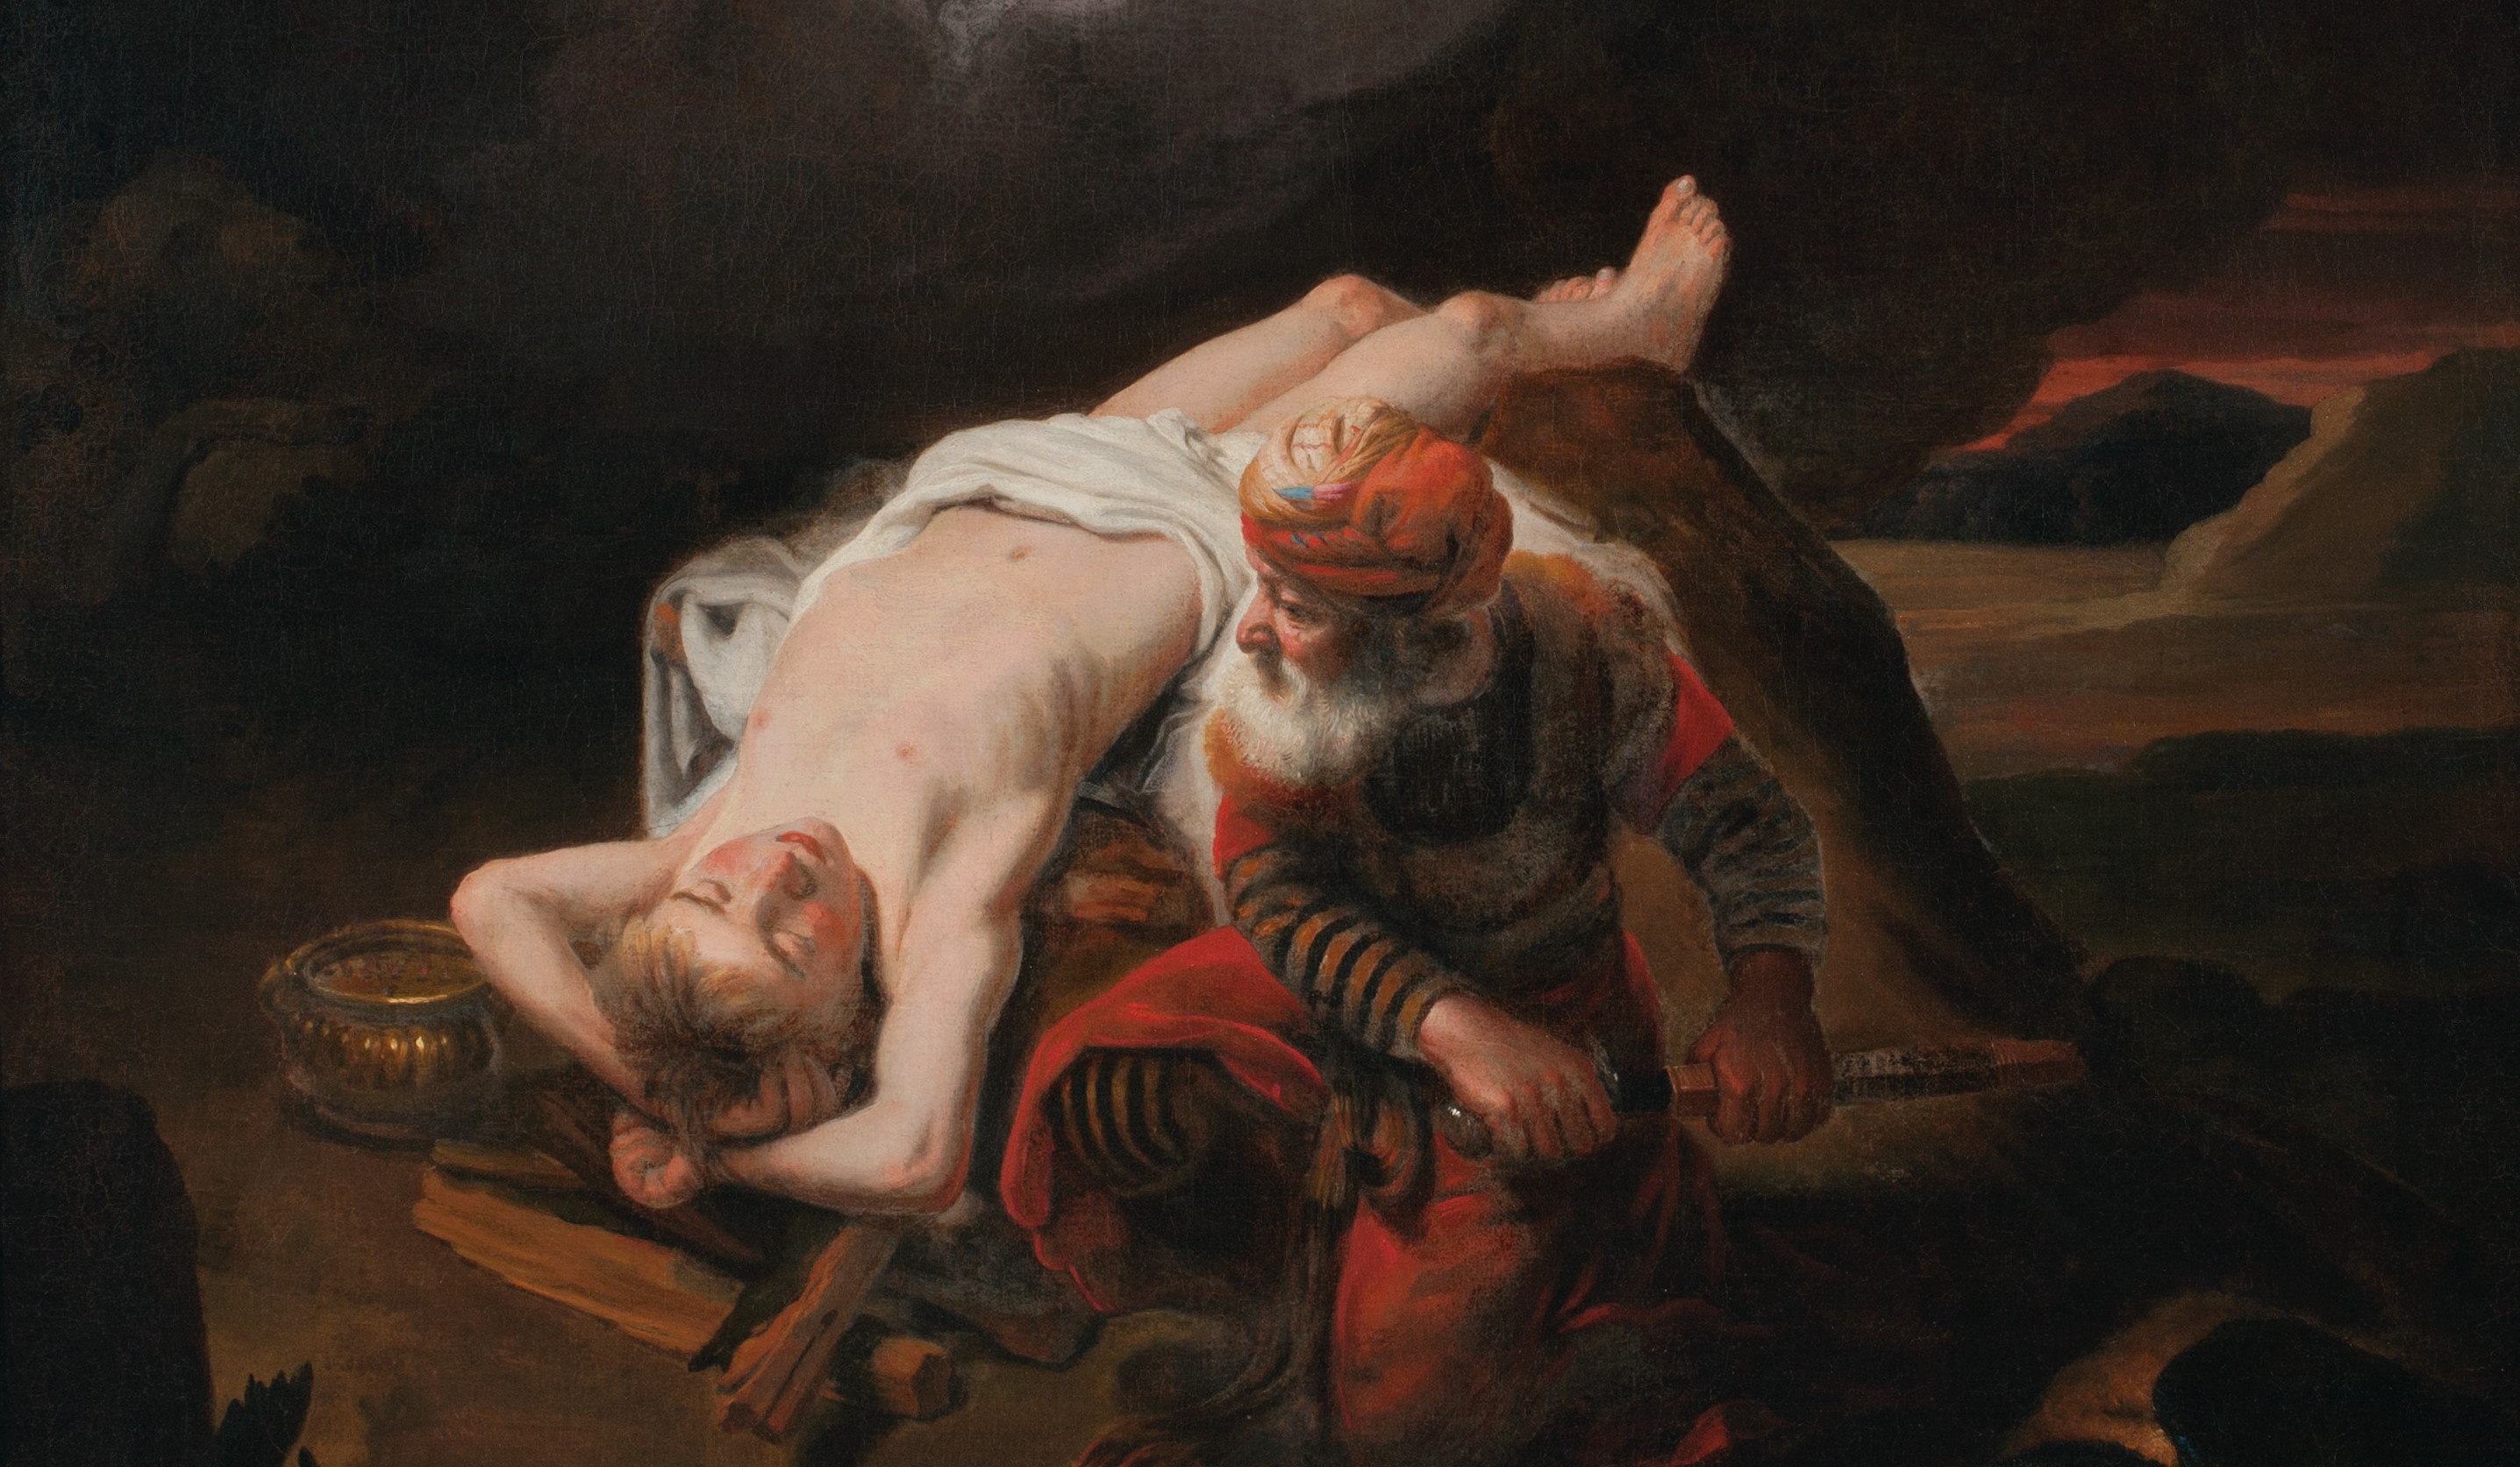 Isaac is depicted as a nude young man, bound to rock and wood on the ground. Abraham kneels beside him, wearing a scarlet robe and drawing his knife.